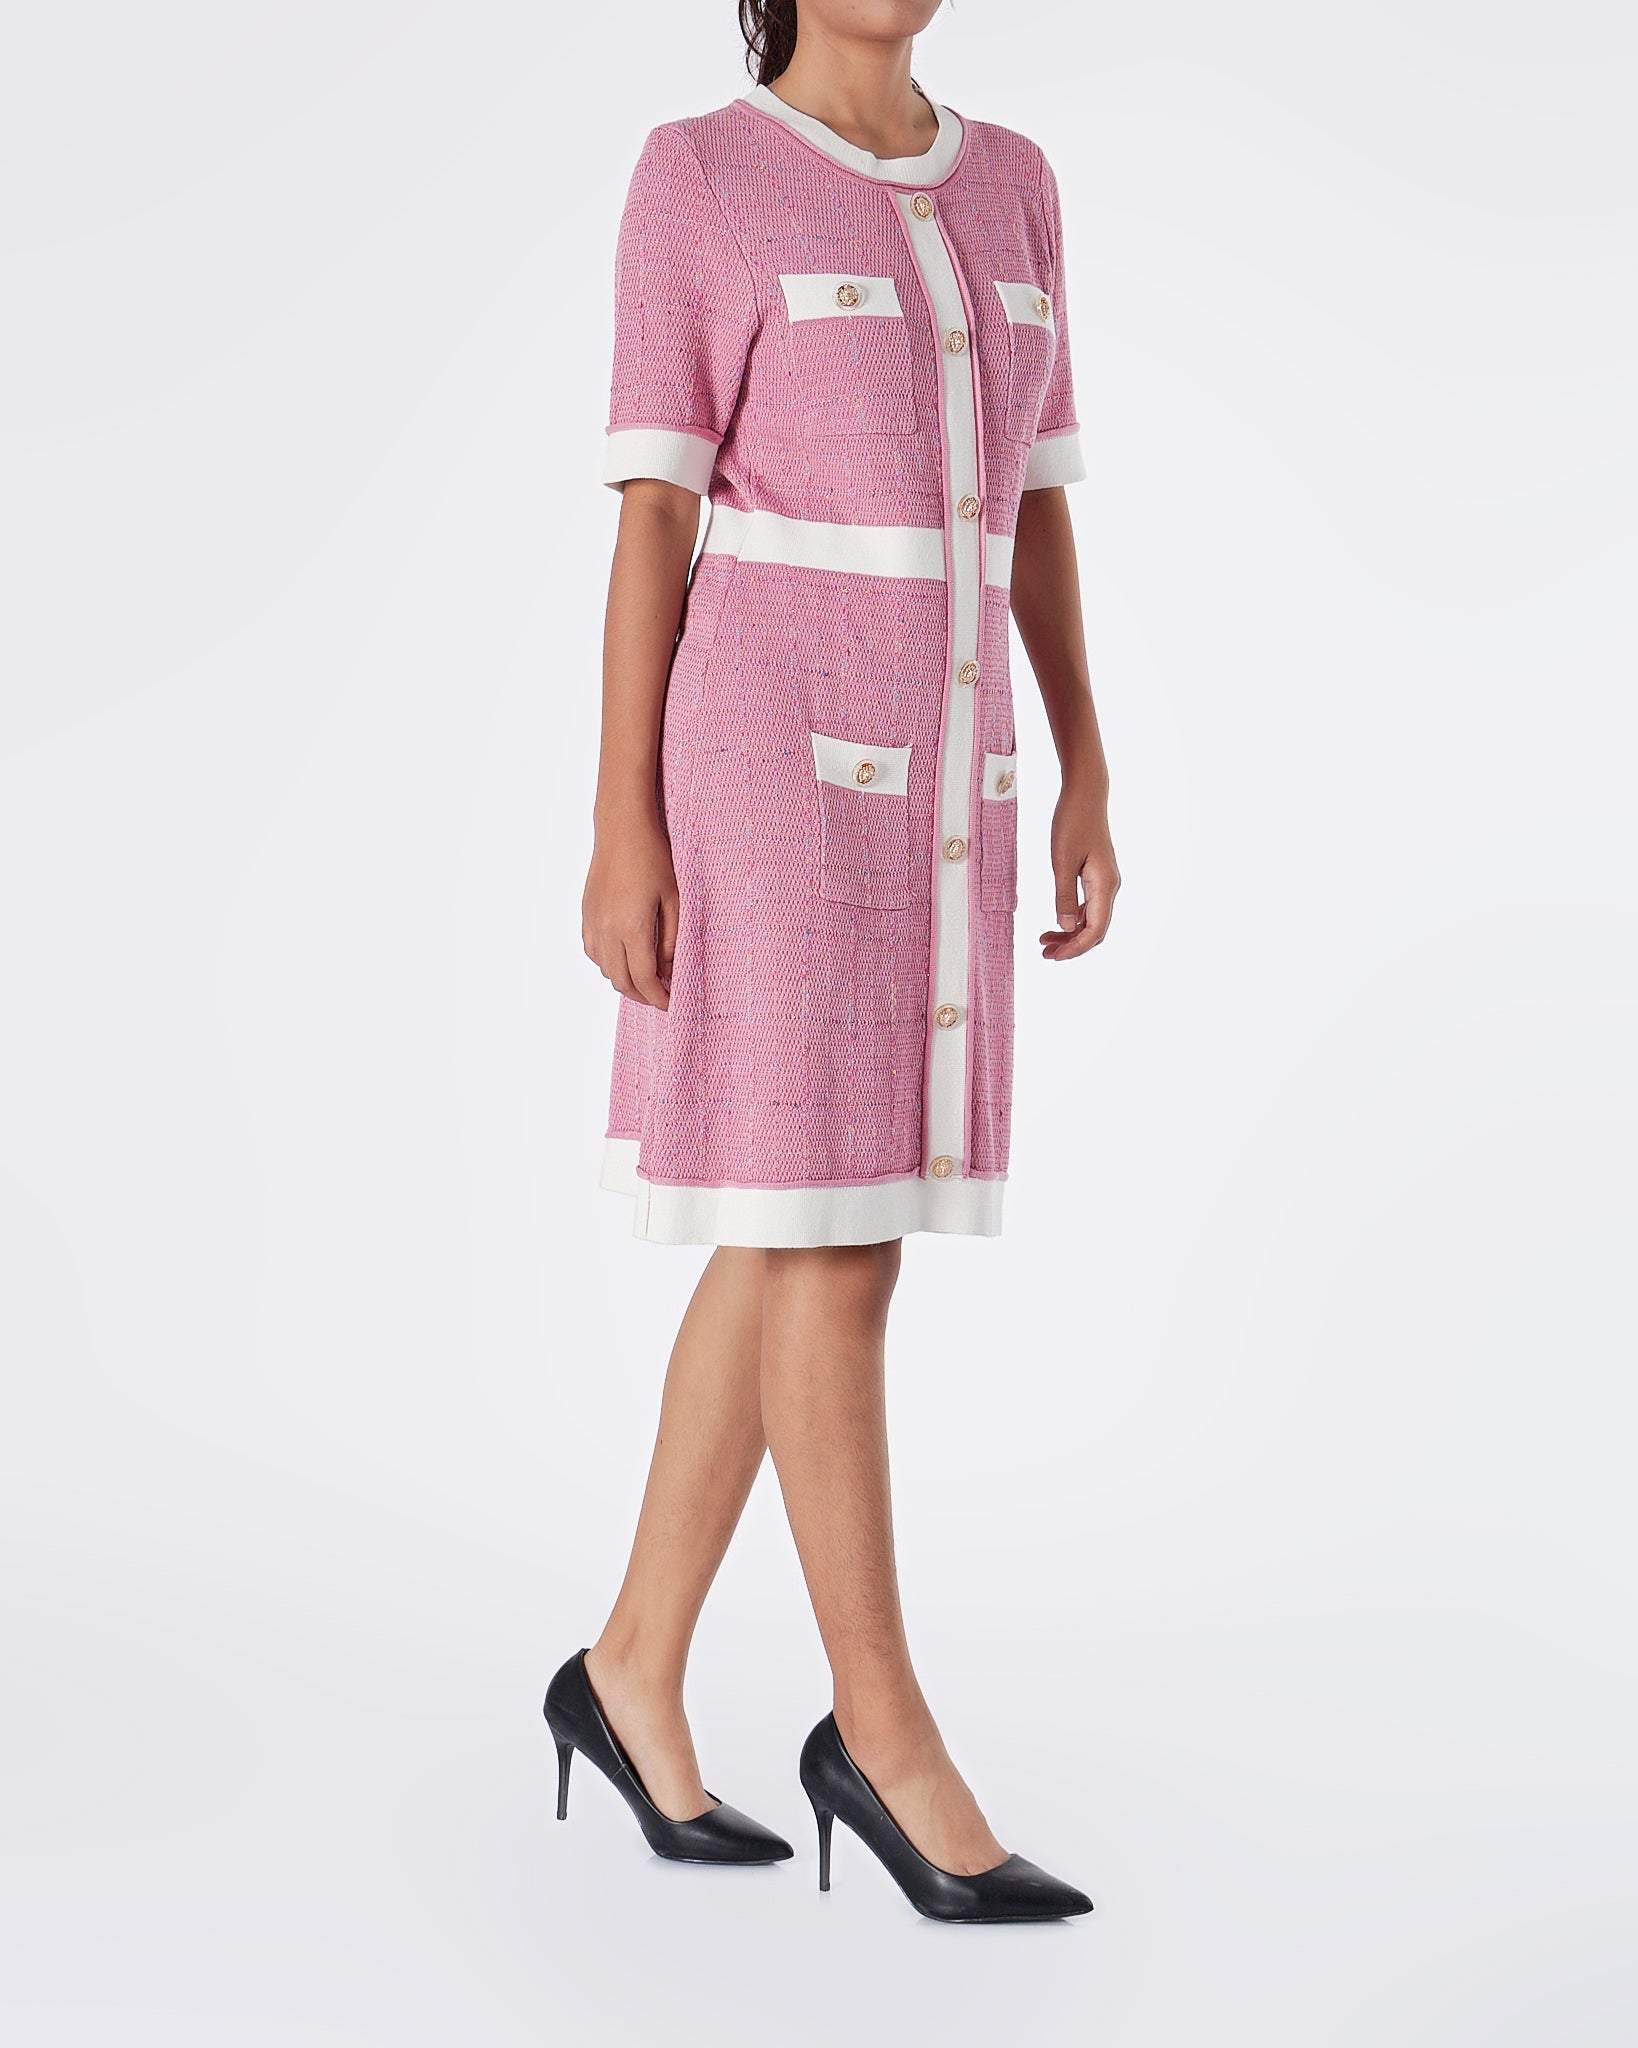 MOI OUTFIT-Tweed Lady Pink Dress 89.90